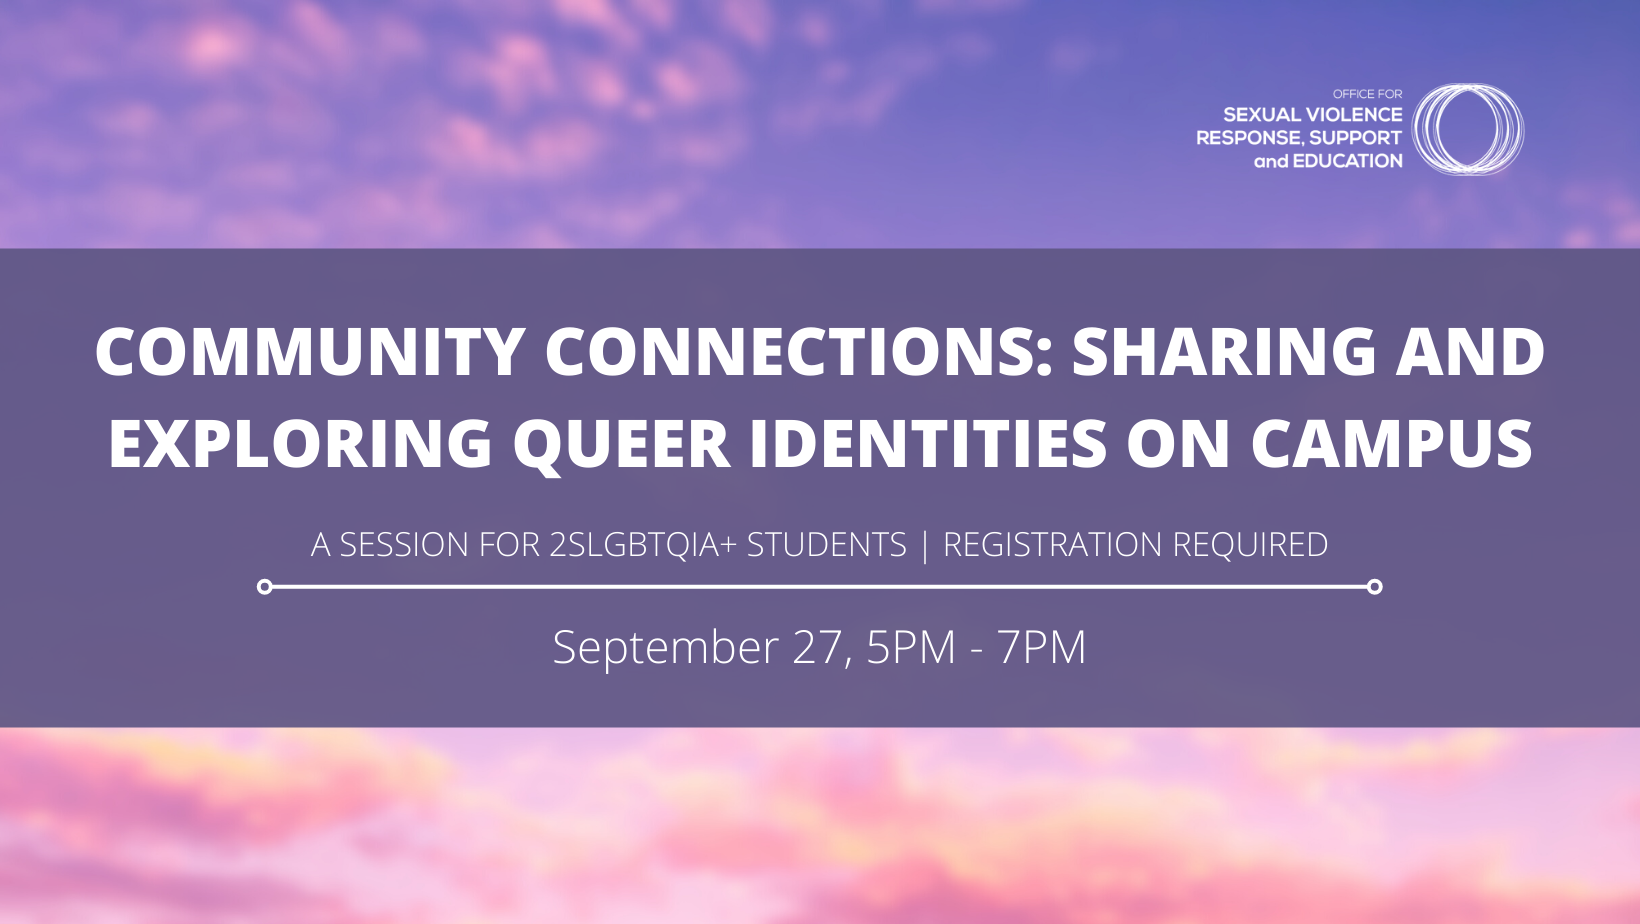 Event Banner for Community Connections with a pink and purple cloud background and the words "A Session for 2SLGBTQIA+ Students